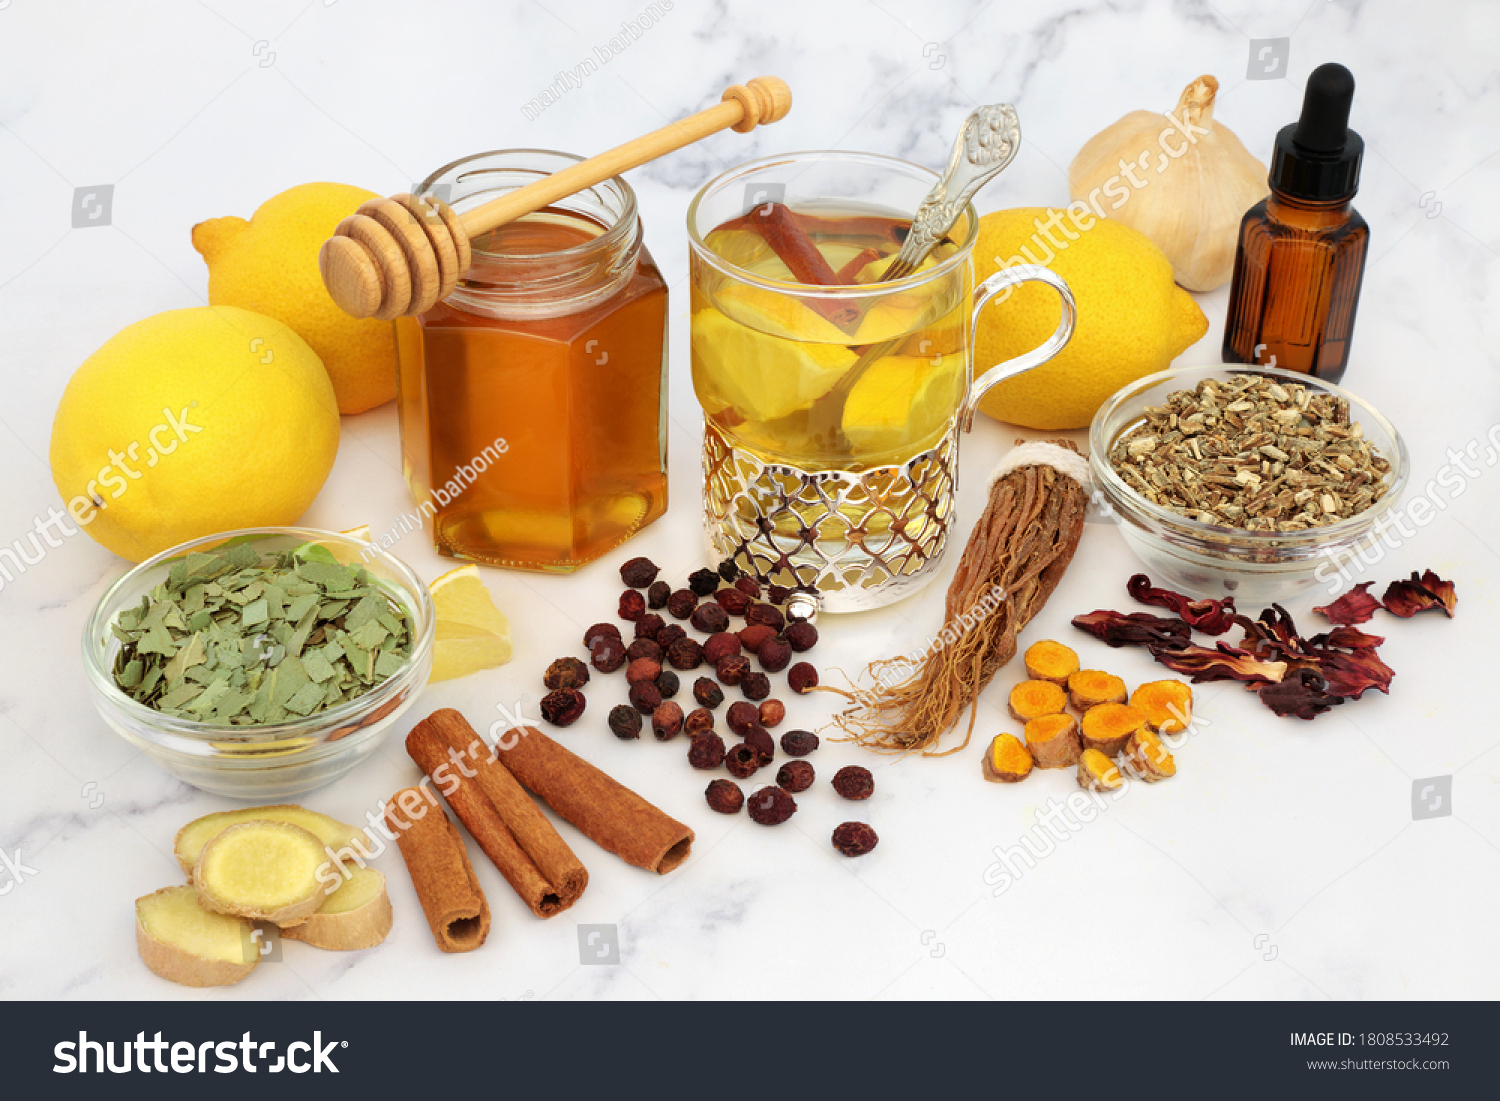 Natural medicinal herbal remedy for cold & flu virus with hot drink with fresh ginger, lemon, honey, cinnamon. echinacea, hawthorn berries, ginseng & eucalyptus essential oil. Immune boosting. #1808533492